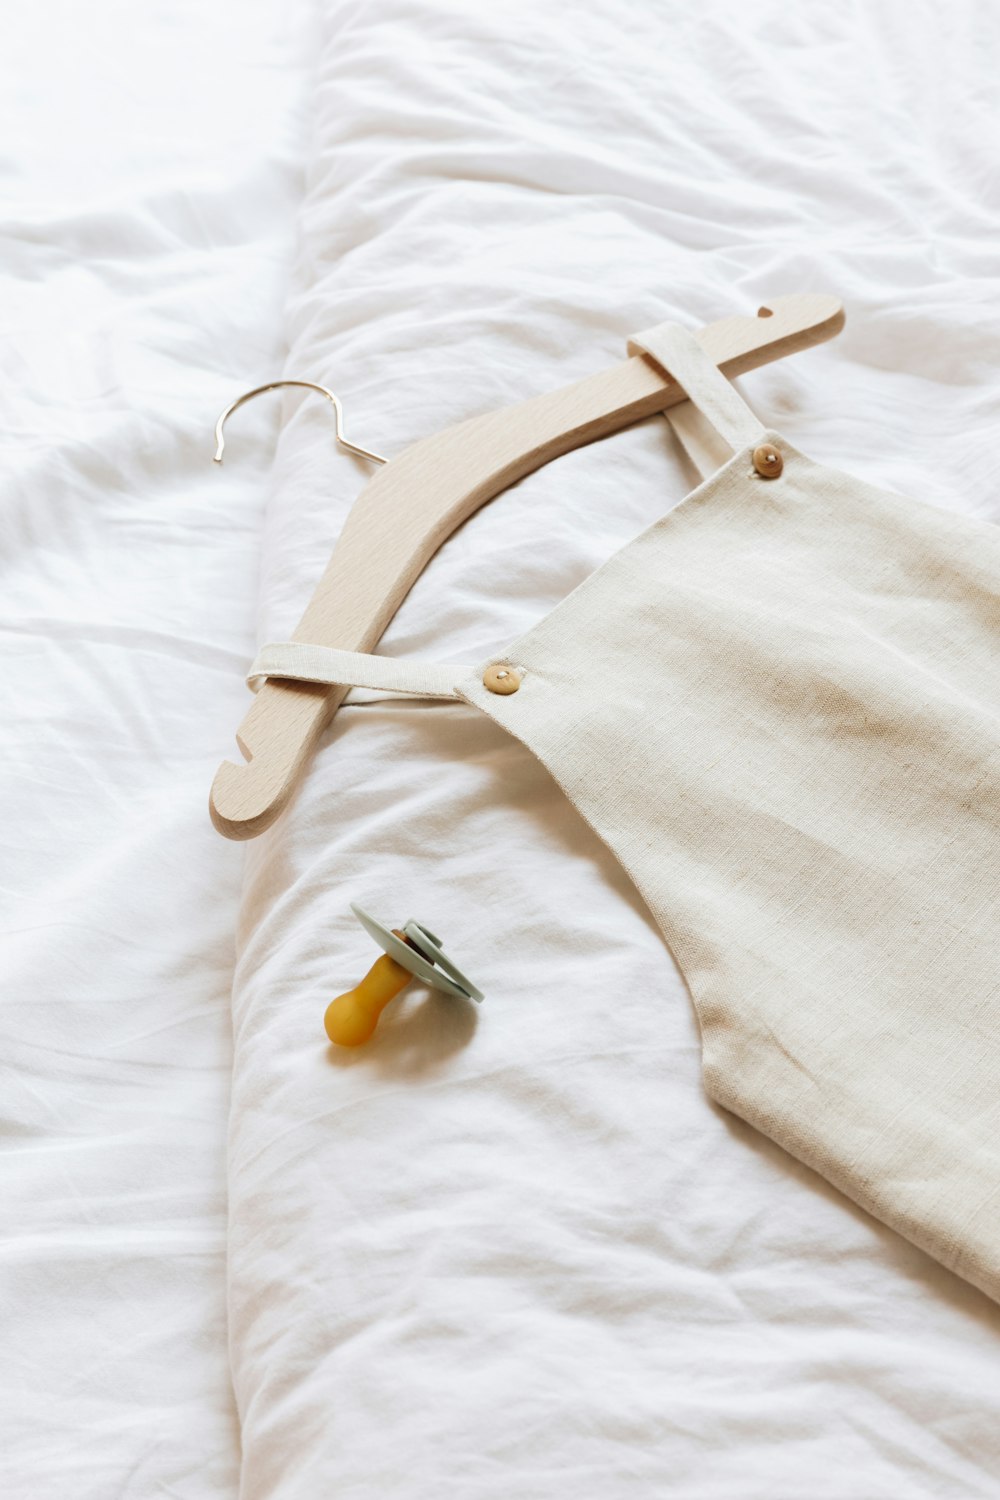 a pair of scissors and a piece of cloth on a bed